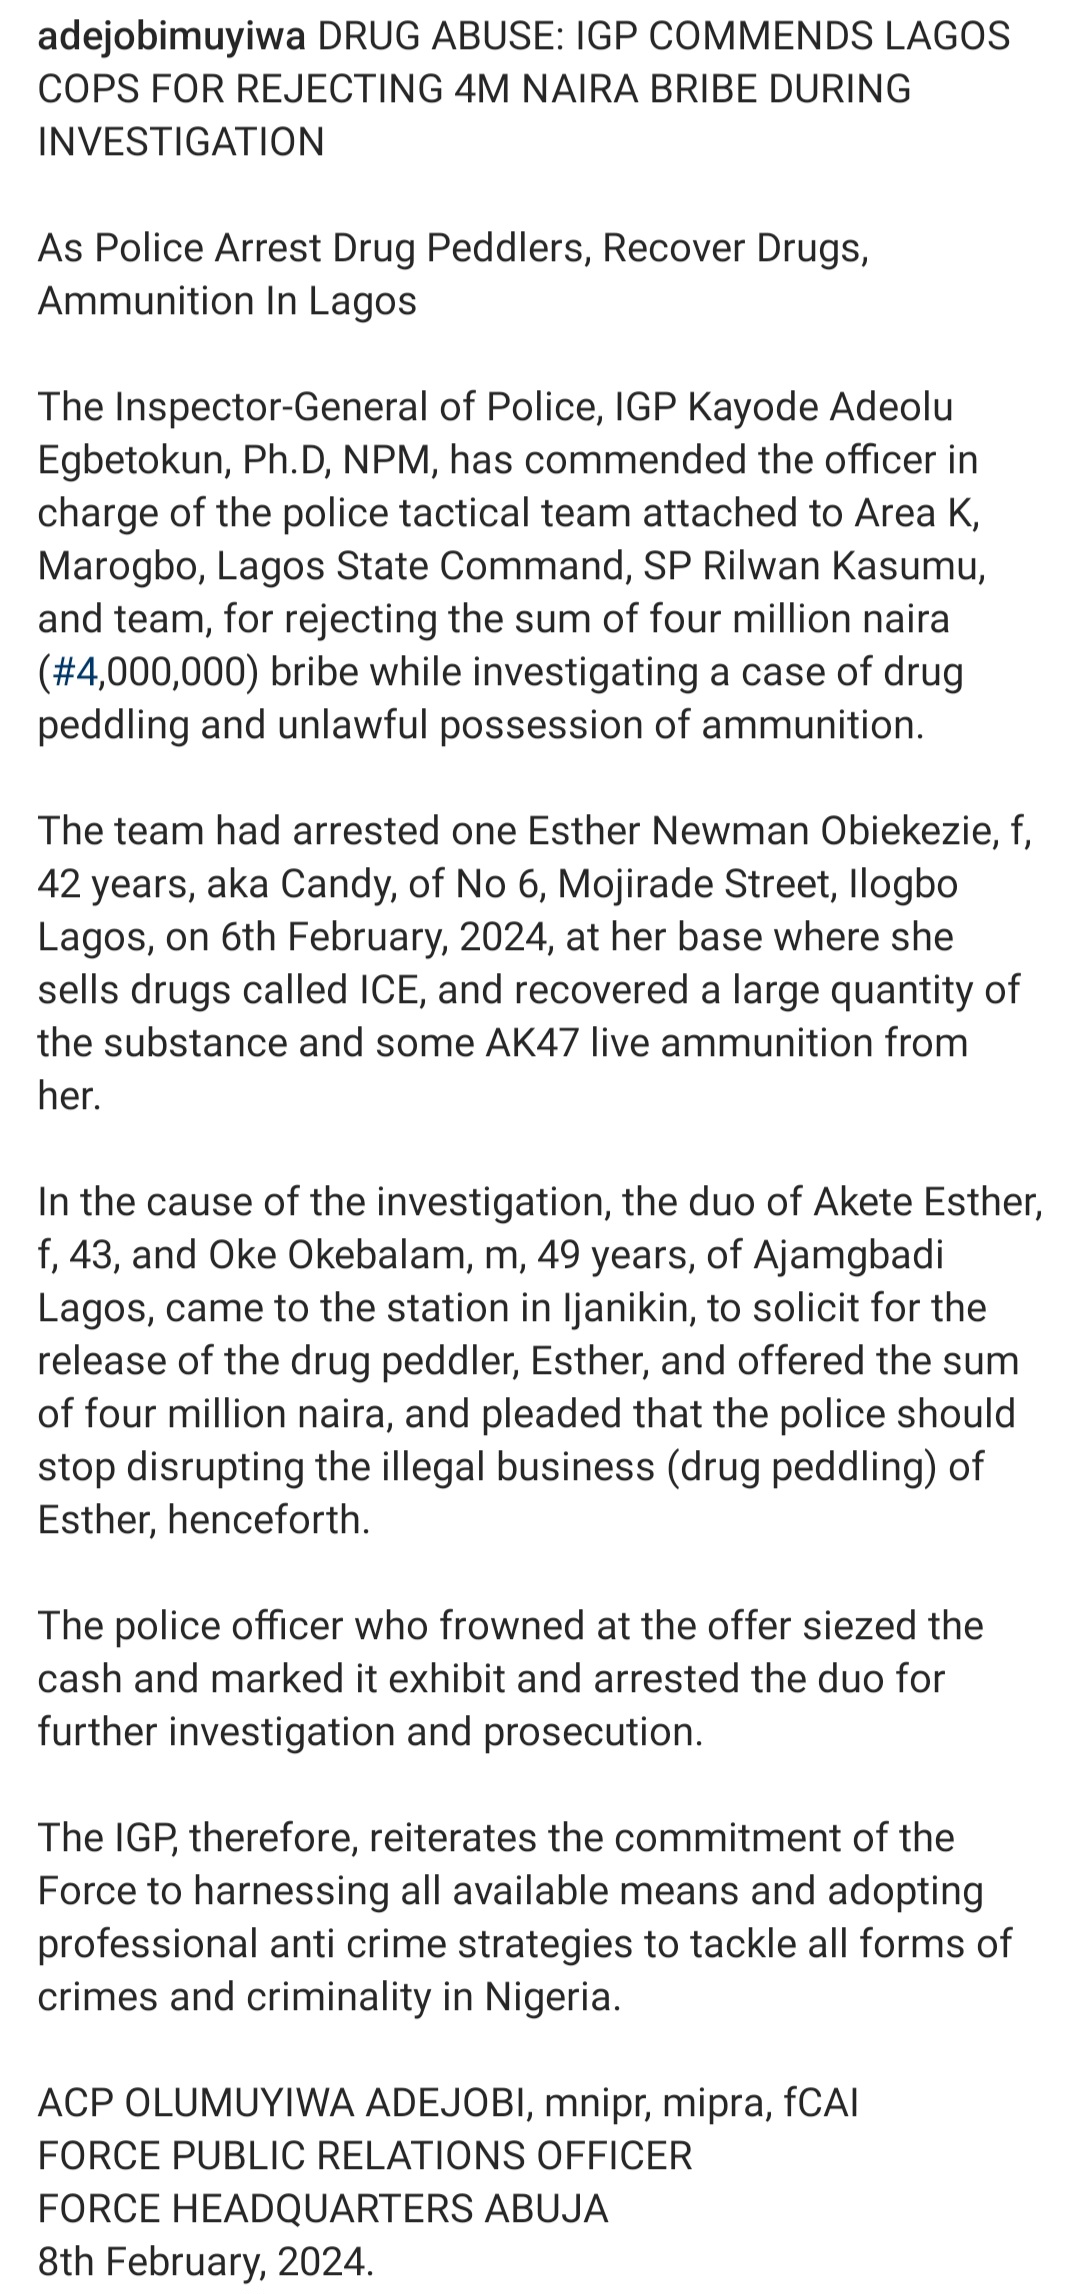 Police rejects N4 million bribe from drug peddlers in Lagos